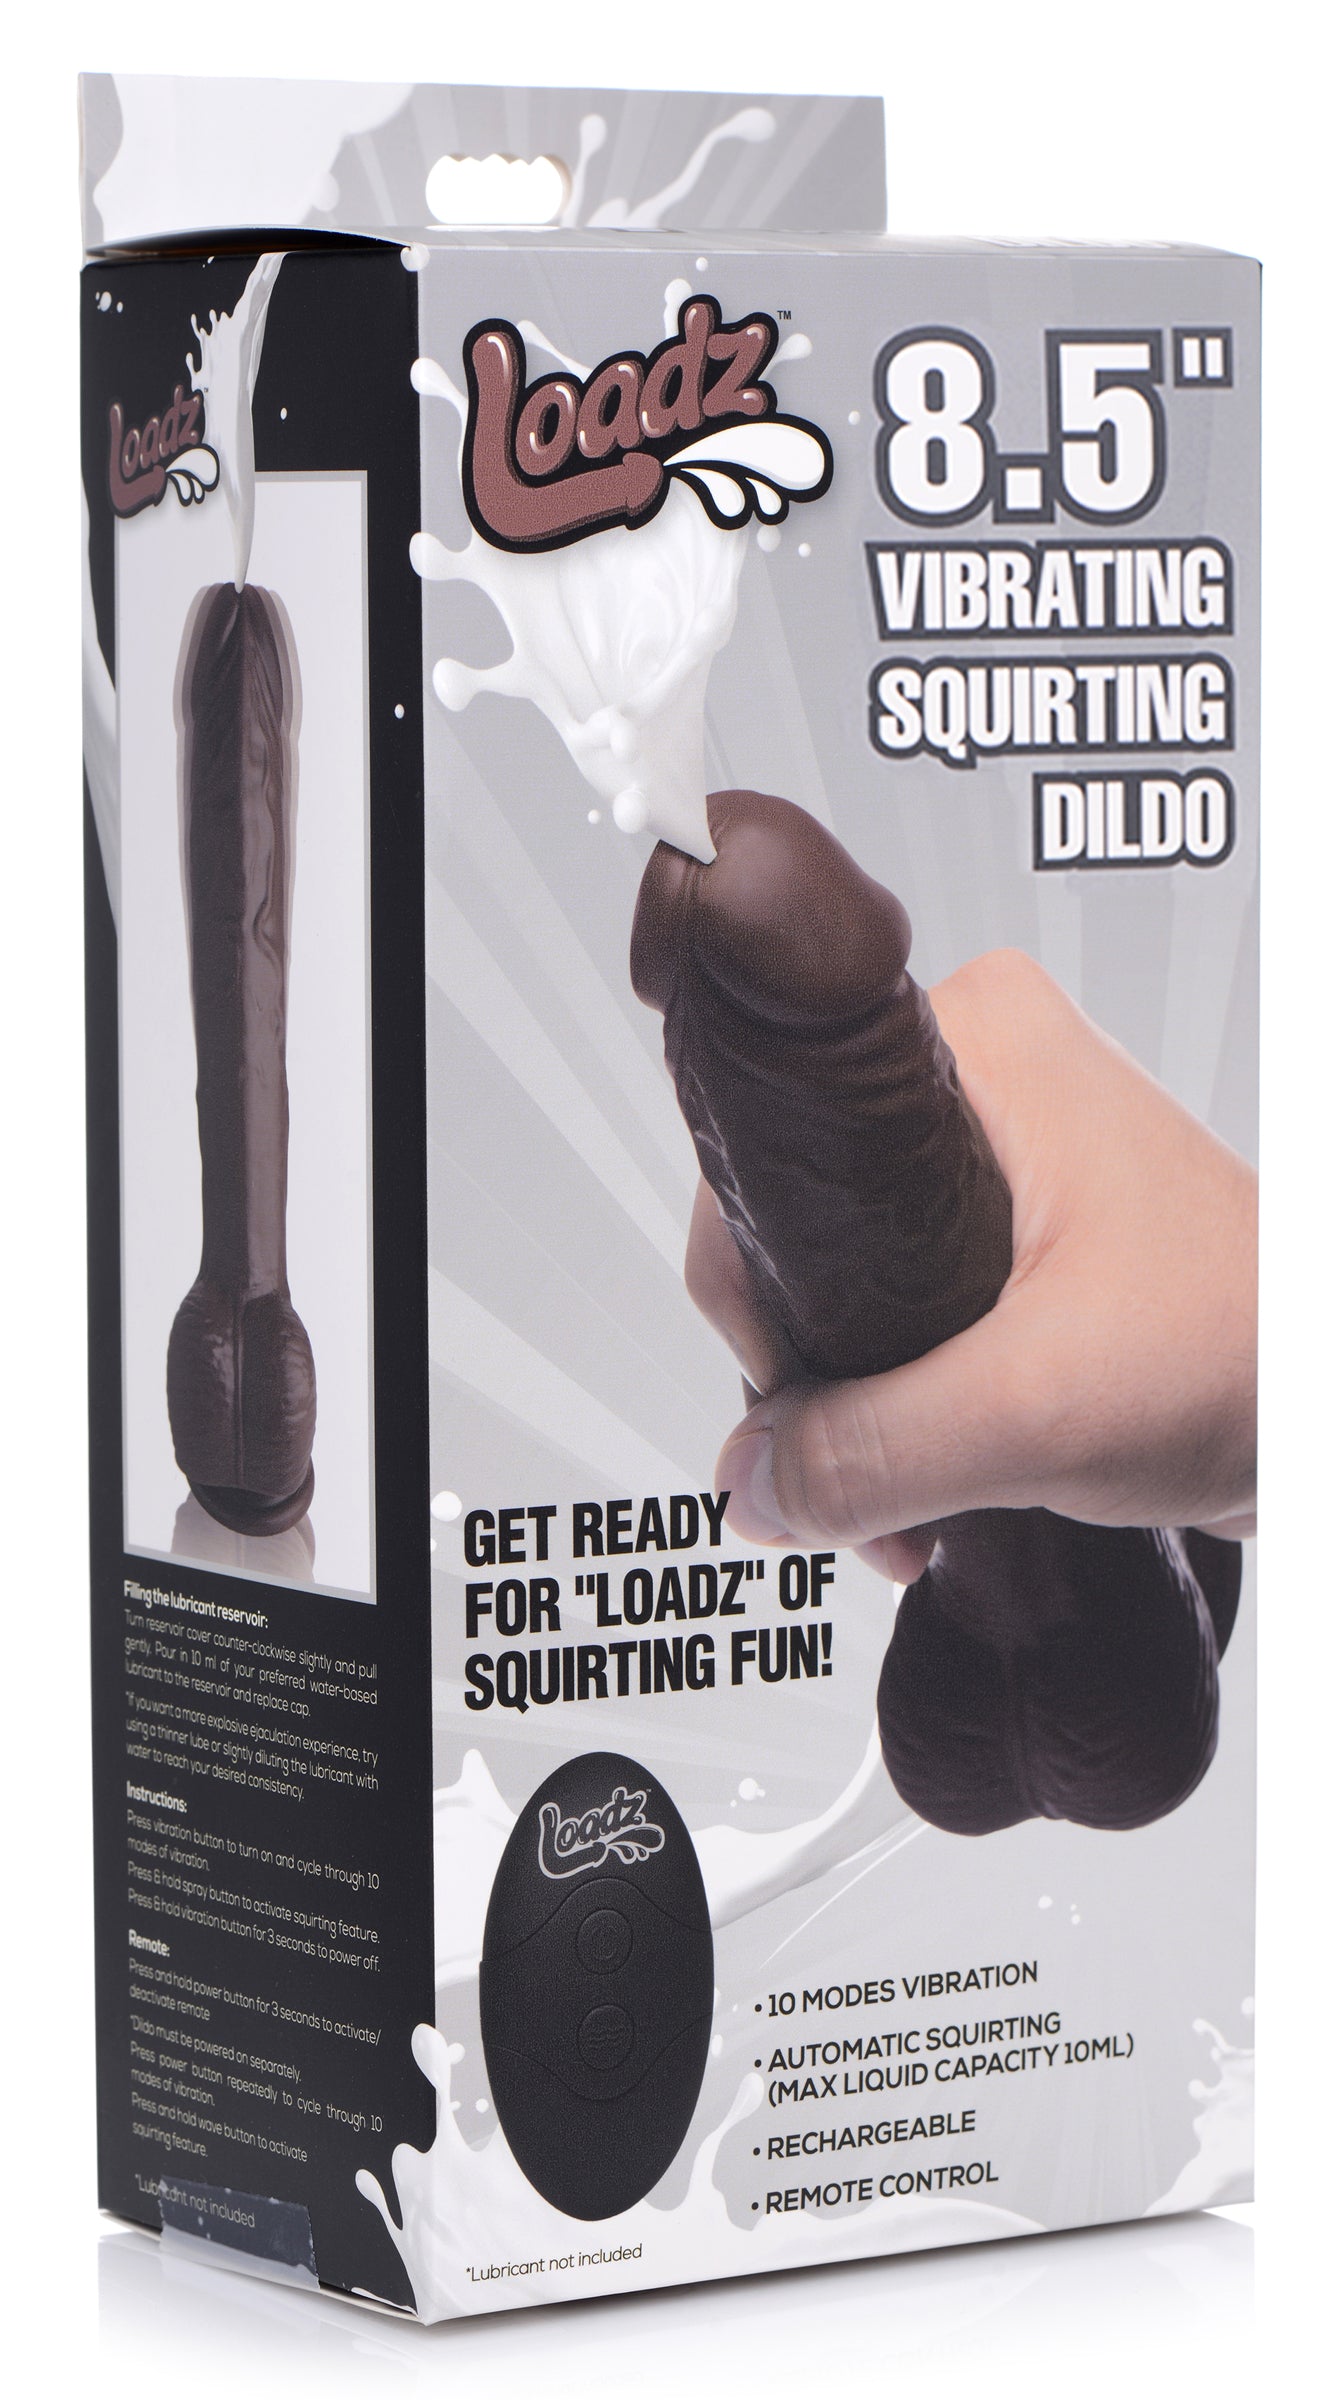 8.5 Inch Vibrating Squirting Dildo with Remote Control - Dark - UABDSM